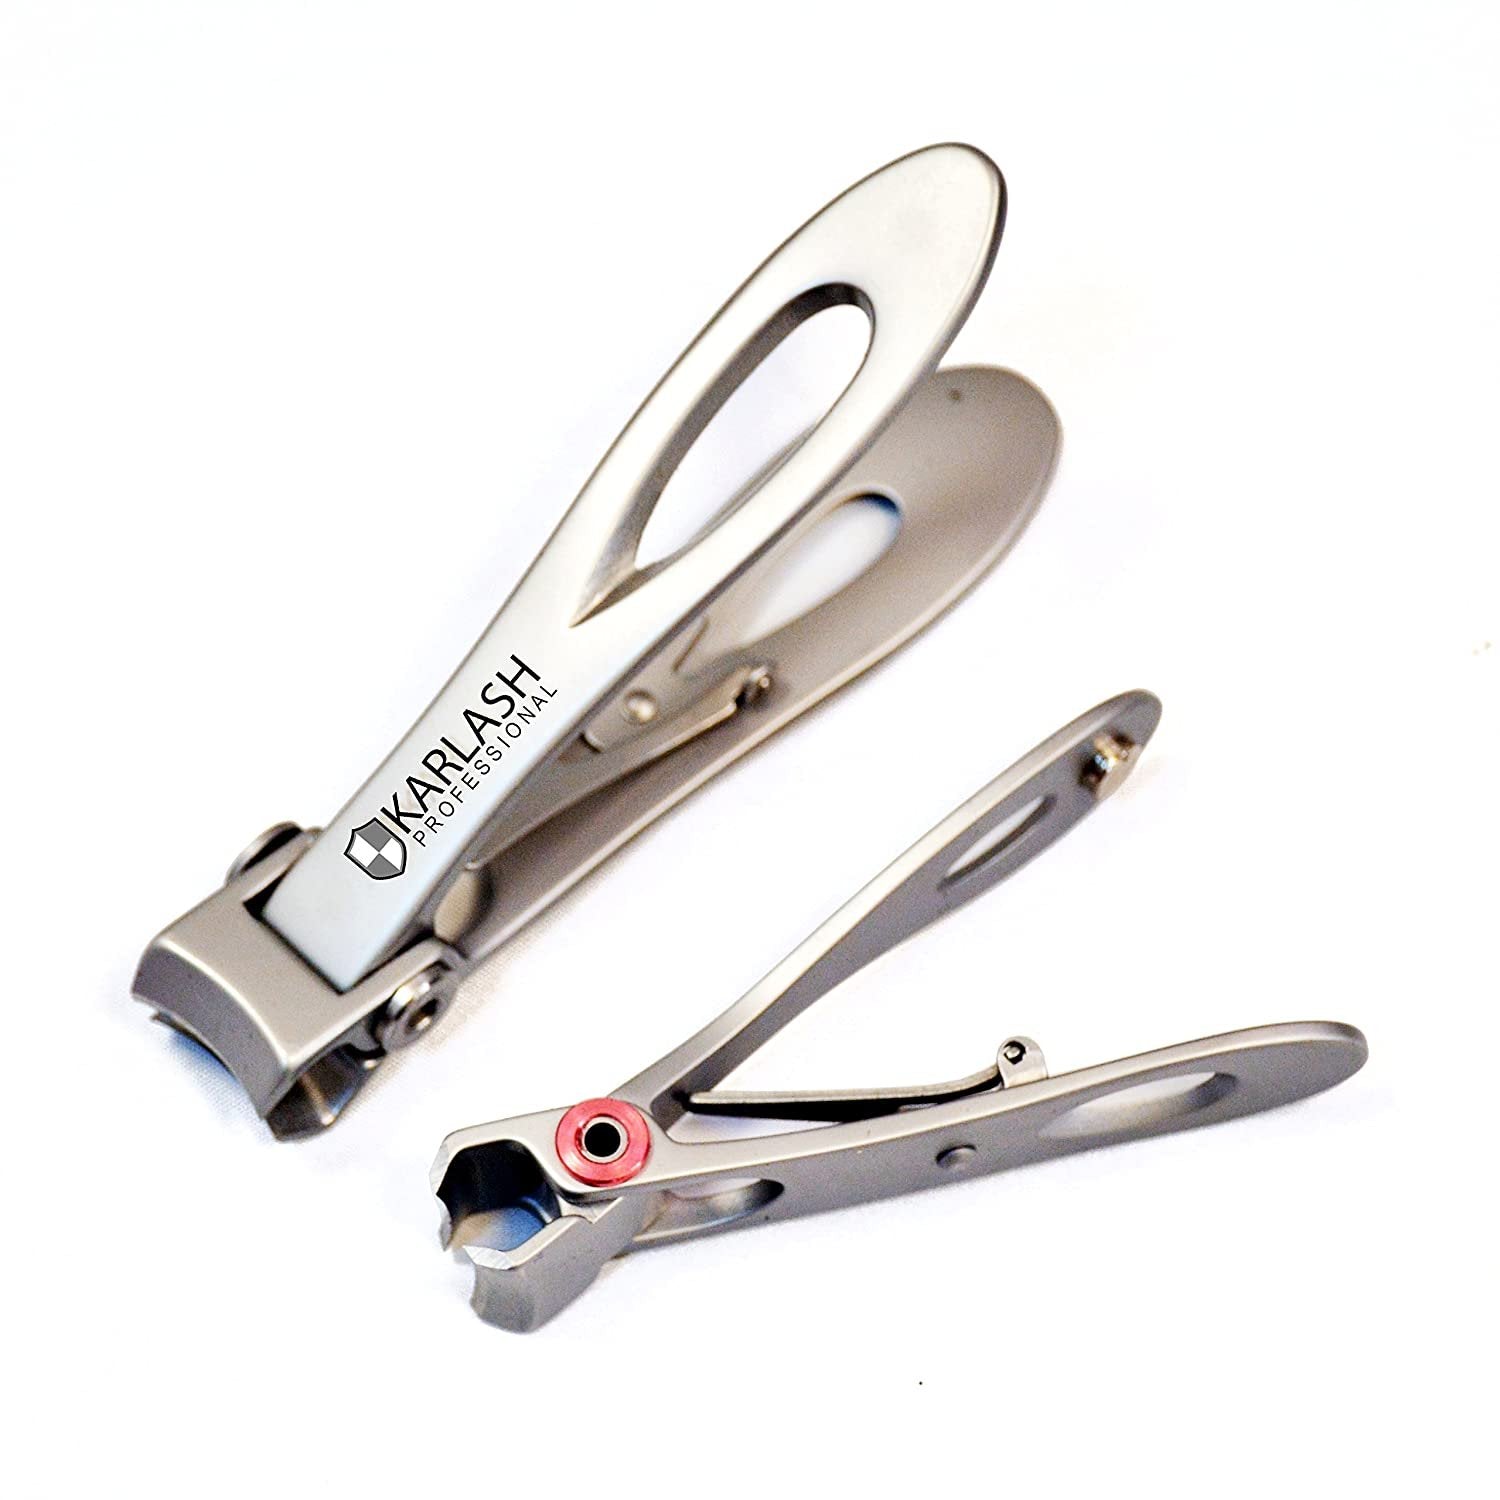 Karlash Stainless Steel Toe and Nail Clipper with Ring Lock System Duo Kit 2 Pc